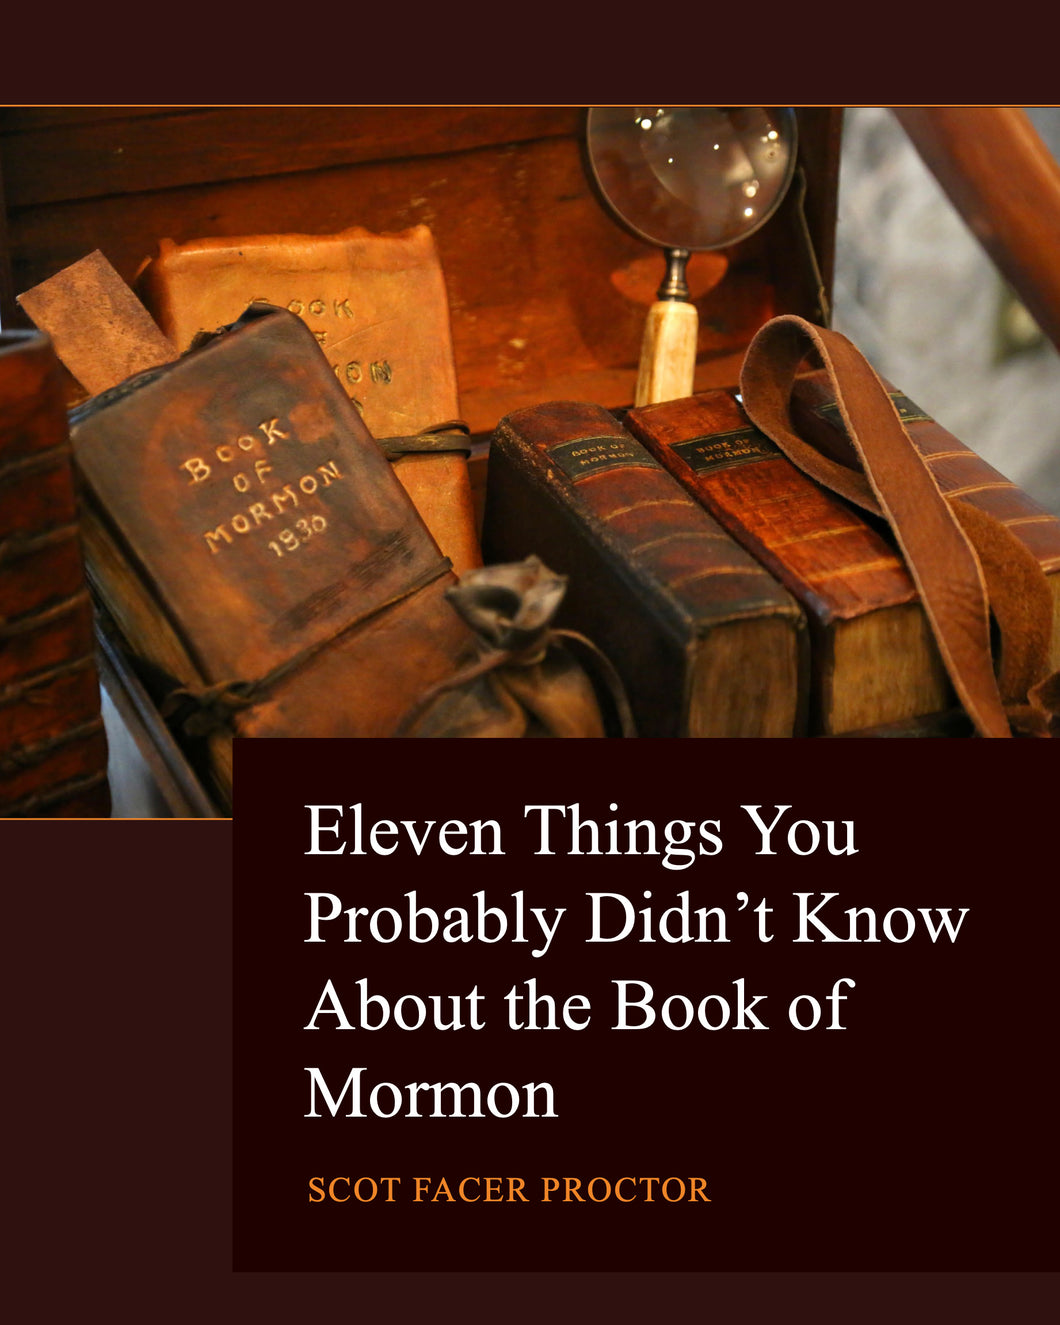 Eleven Things You Probably Didn't Know about the Book of Mormon